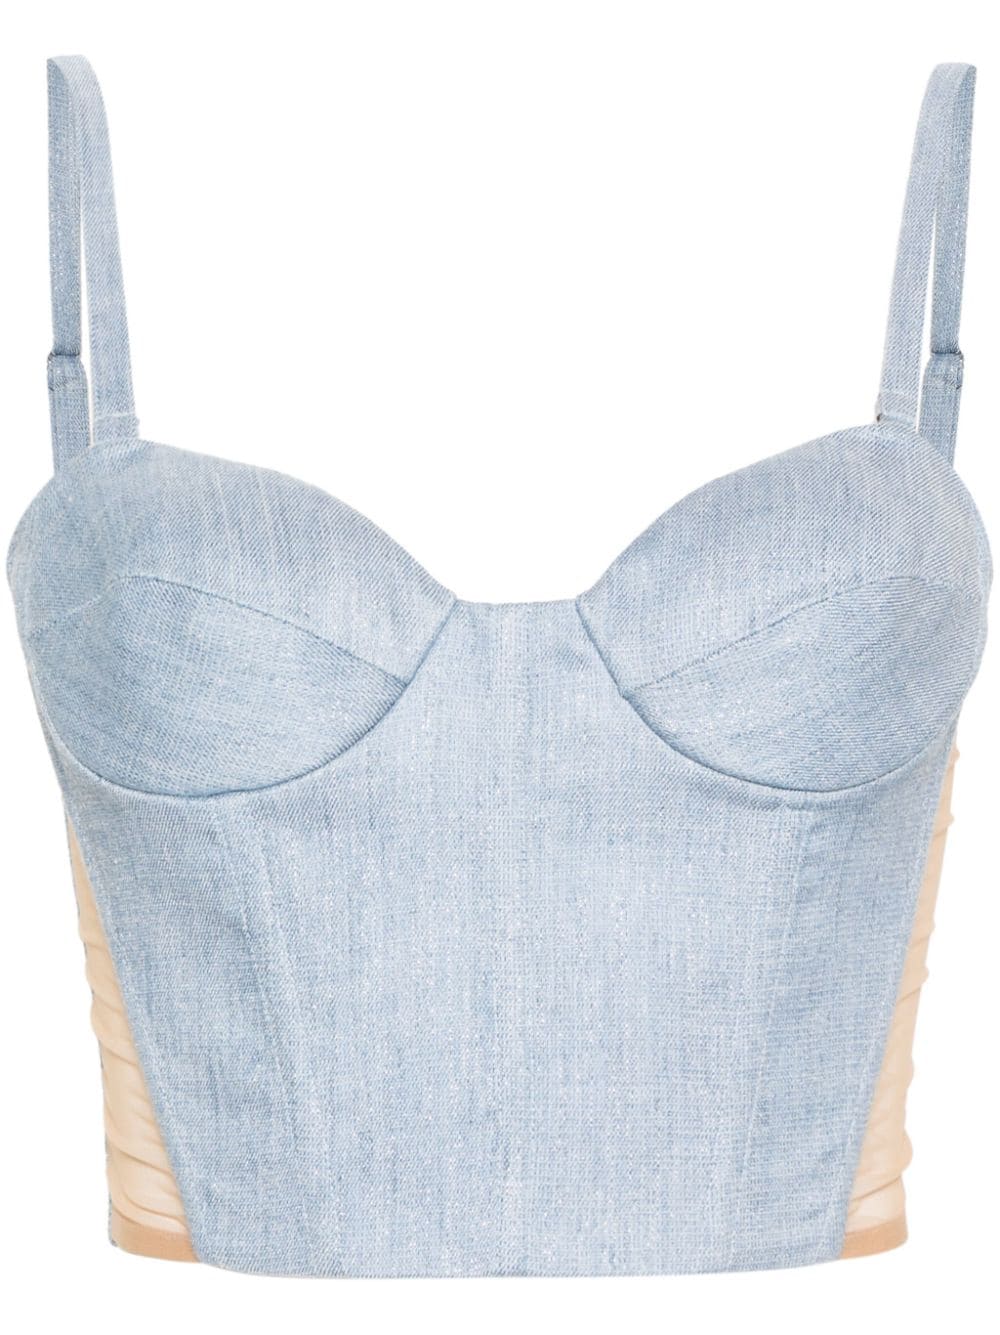 Panelled cropped bustier top<BR/><BR/><BR/><BR/>